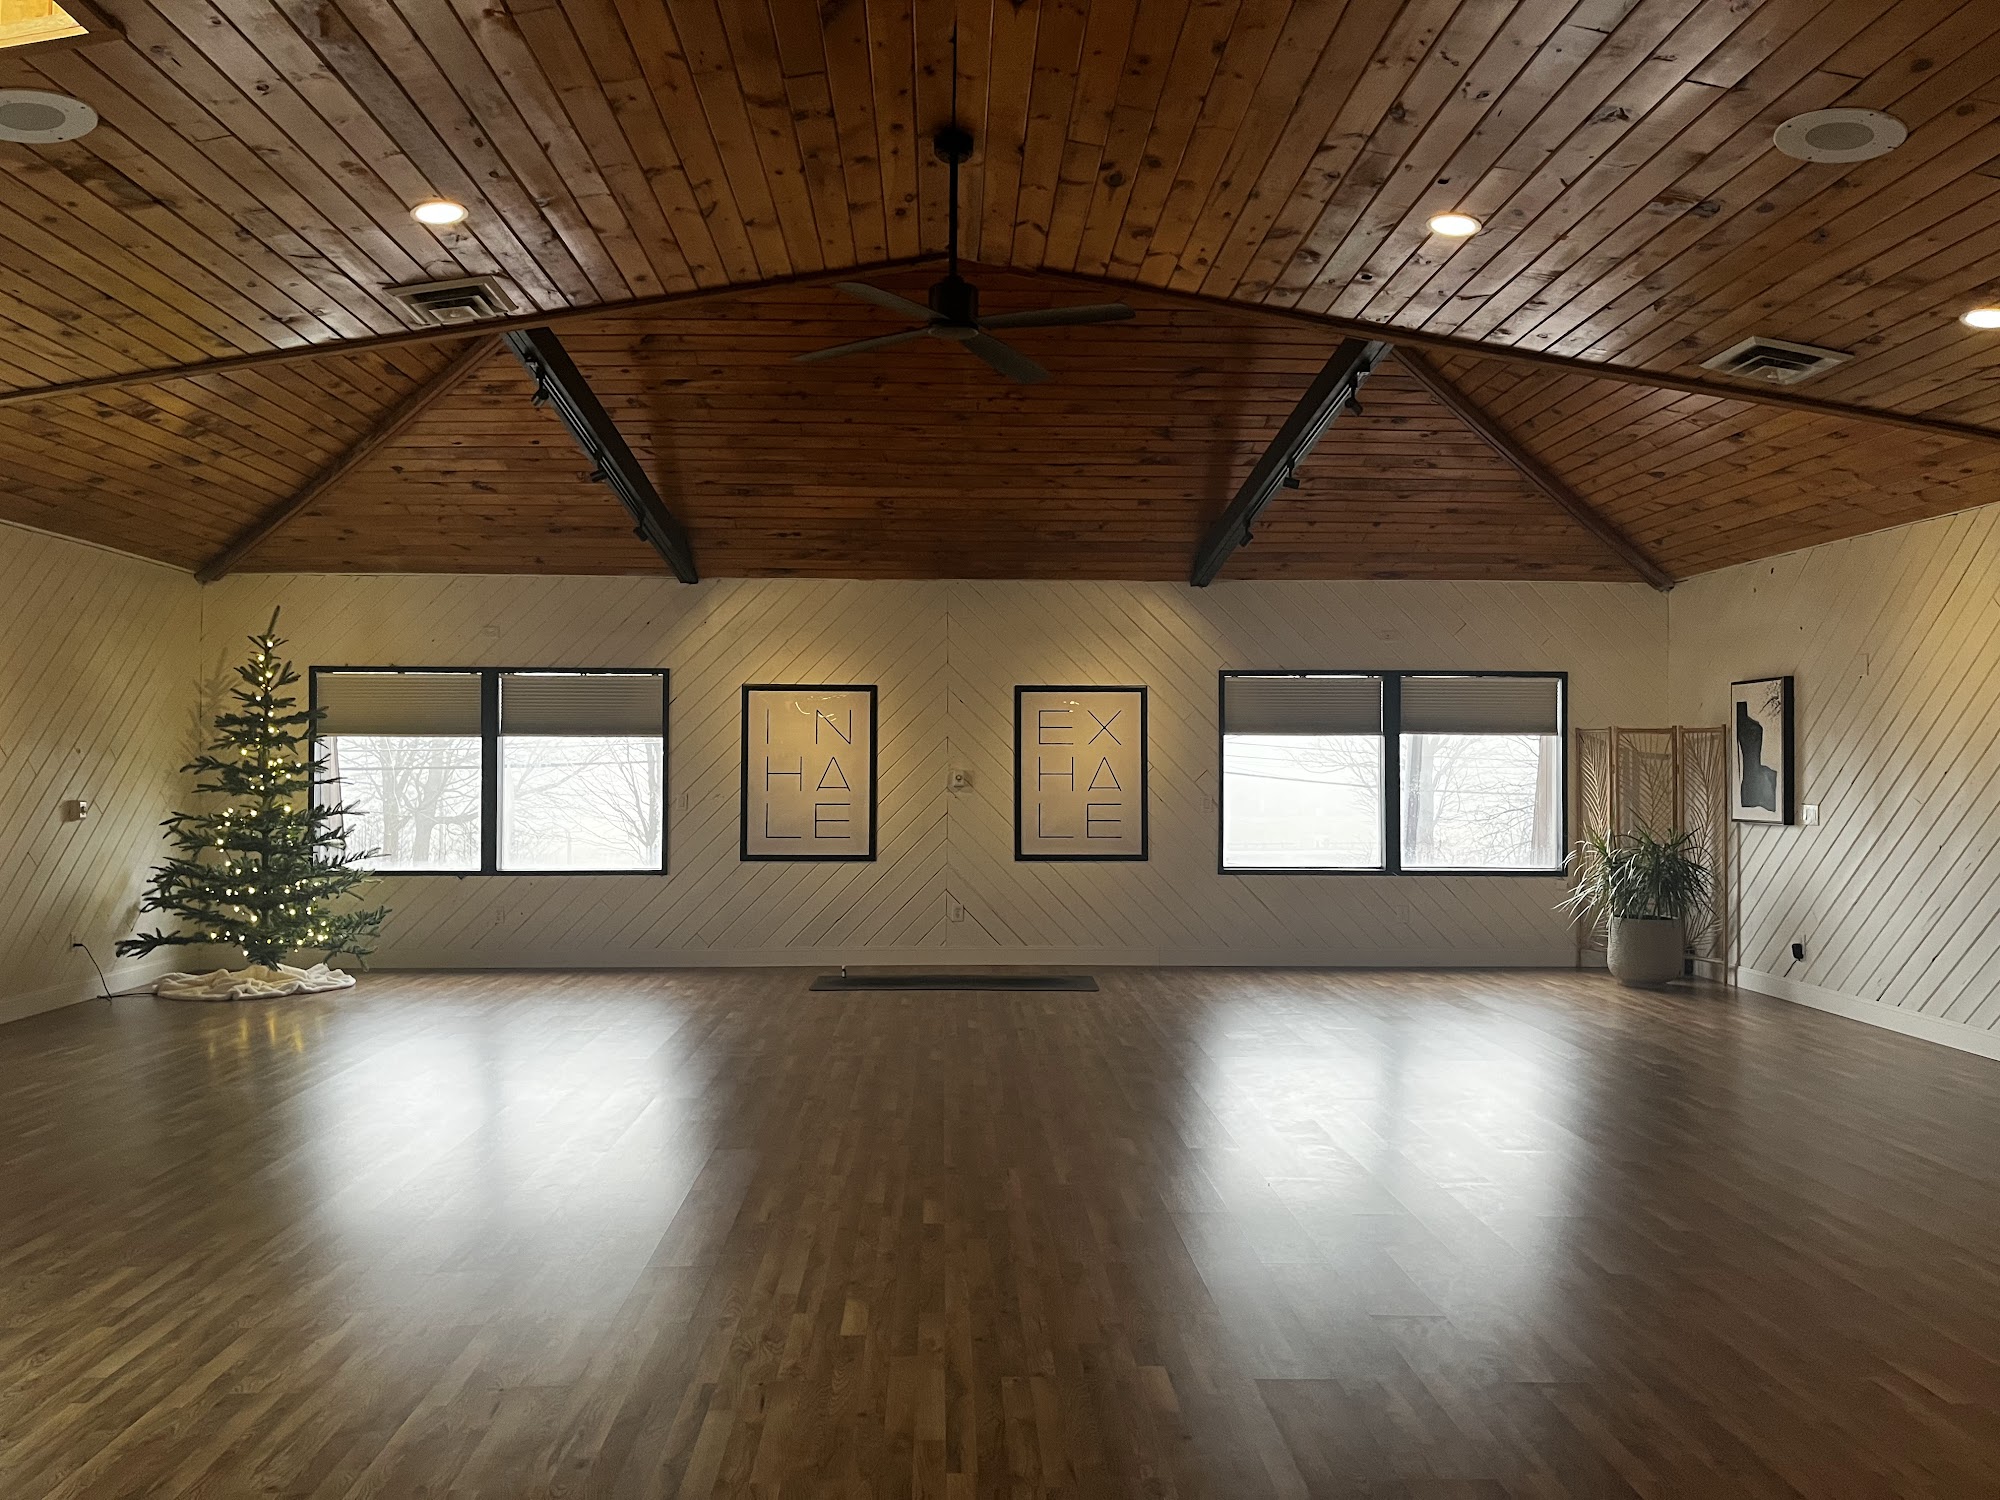 The Yoga Room 52 Waterbury Rd 2nd floor, Prospect Connecticut 06712